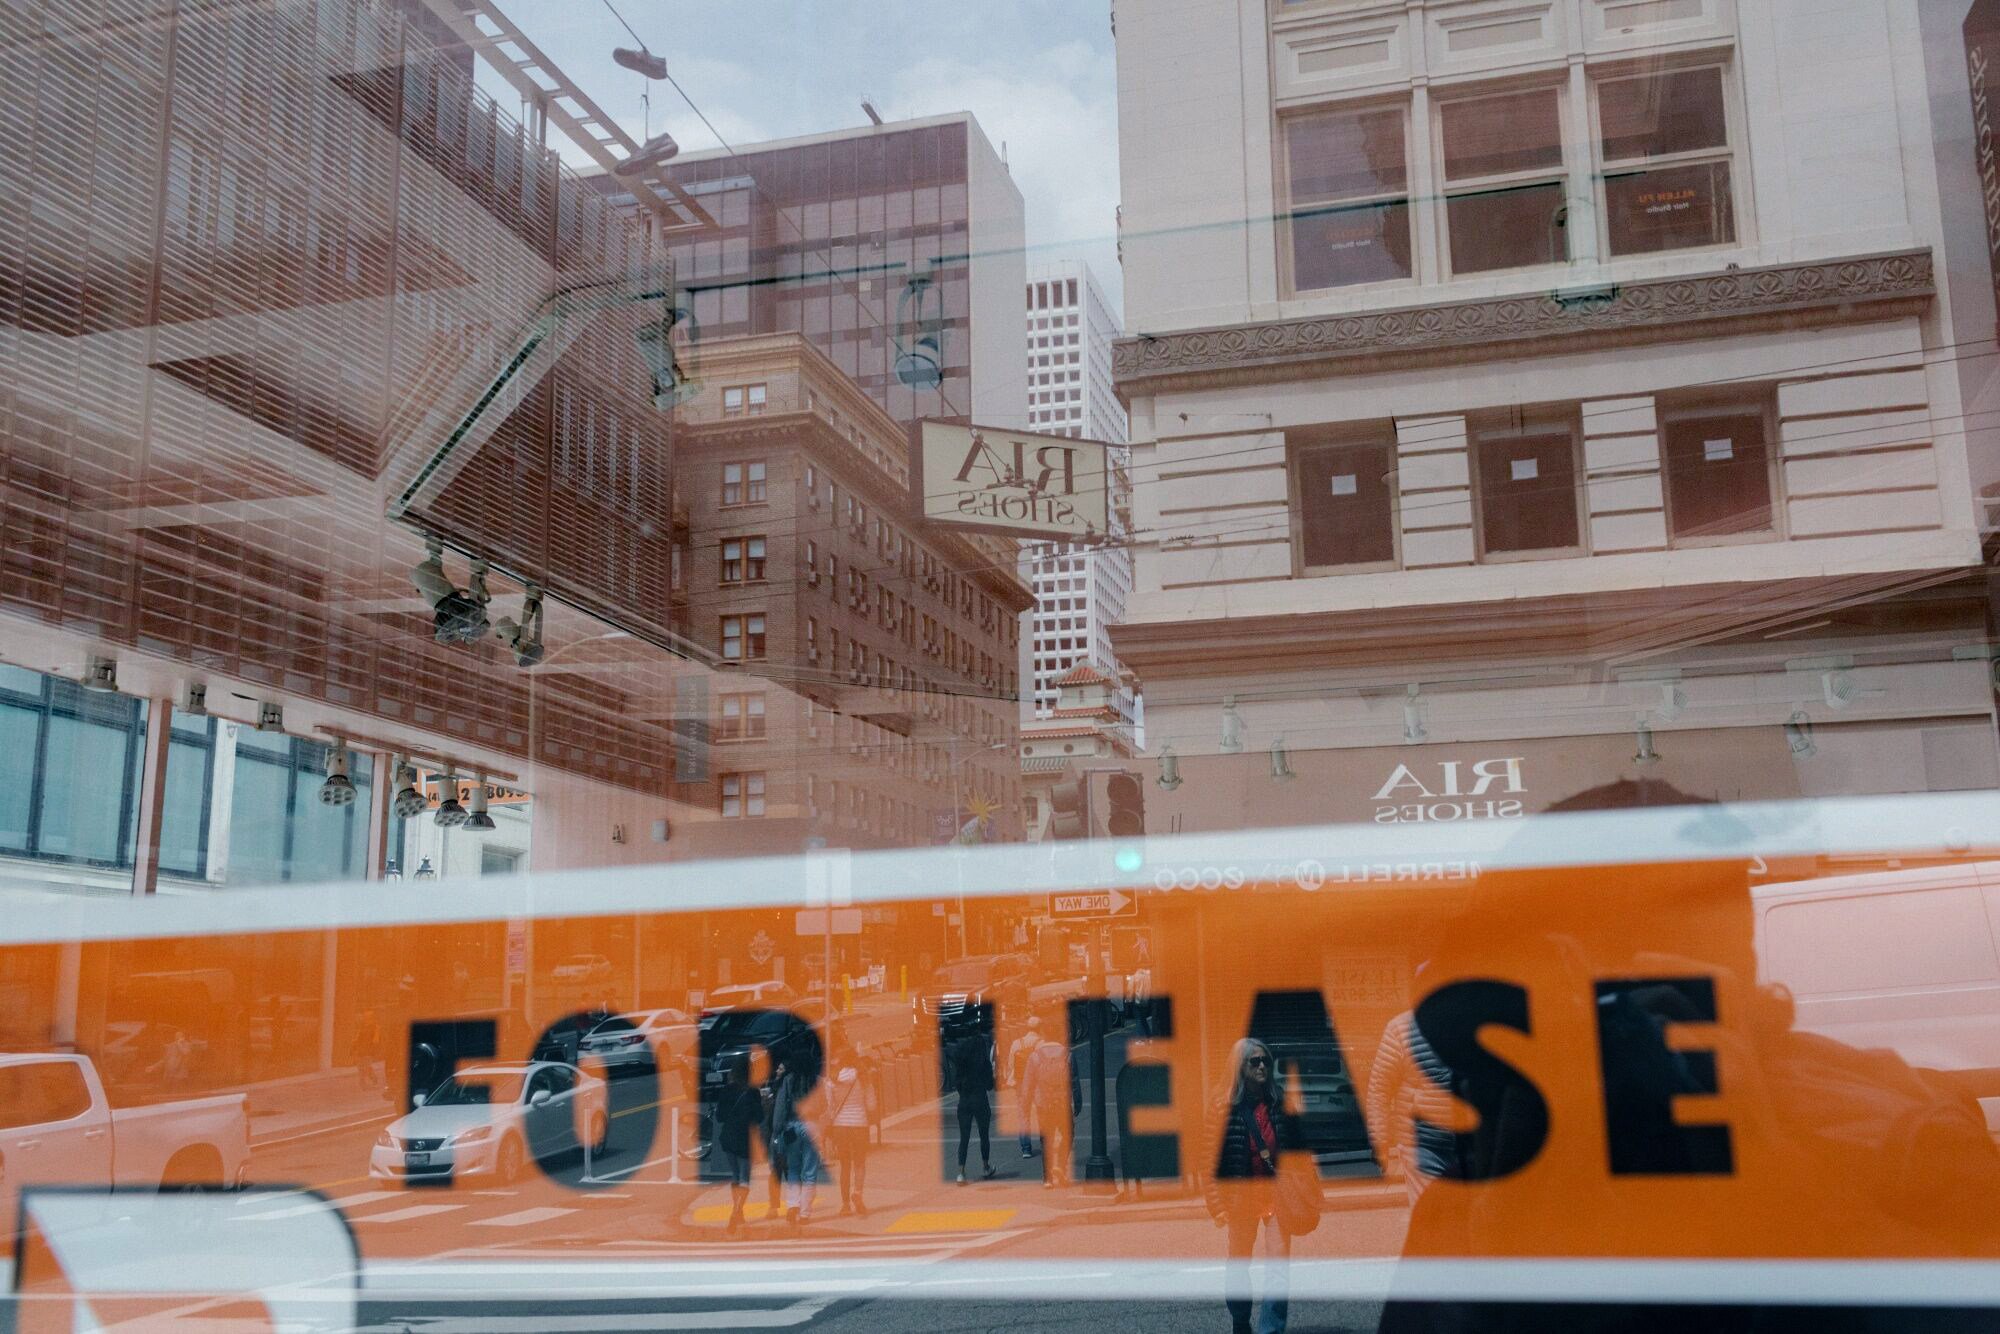 A “For Lease” sign in a shopfront in the Union Square shopping district of San Francisco, California, on May 3. San Francisco’s office vacancy rate soared to a record 27.6 per cent at the end of 2022, compared with just 3.7 per cent before the pandemic. Photo: Bloomberg